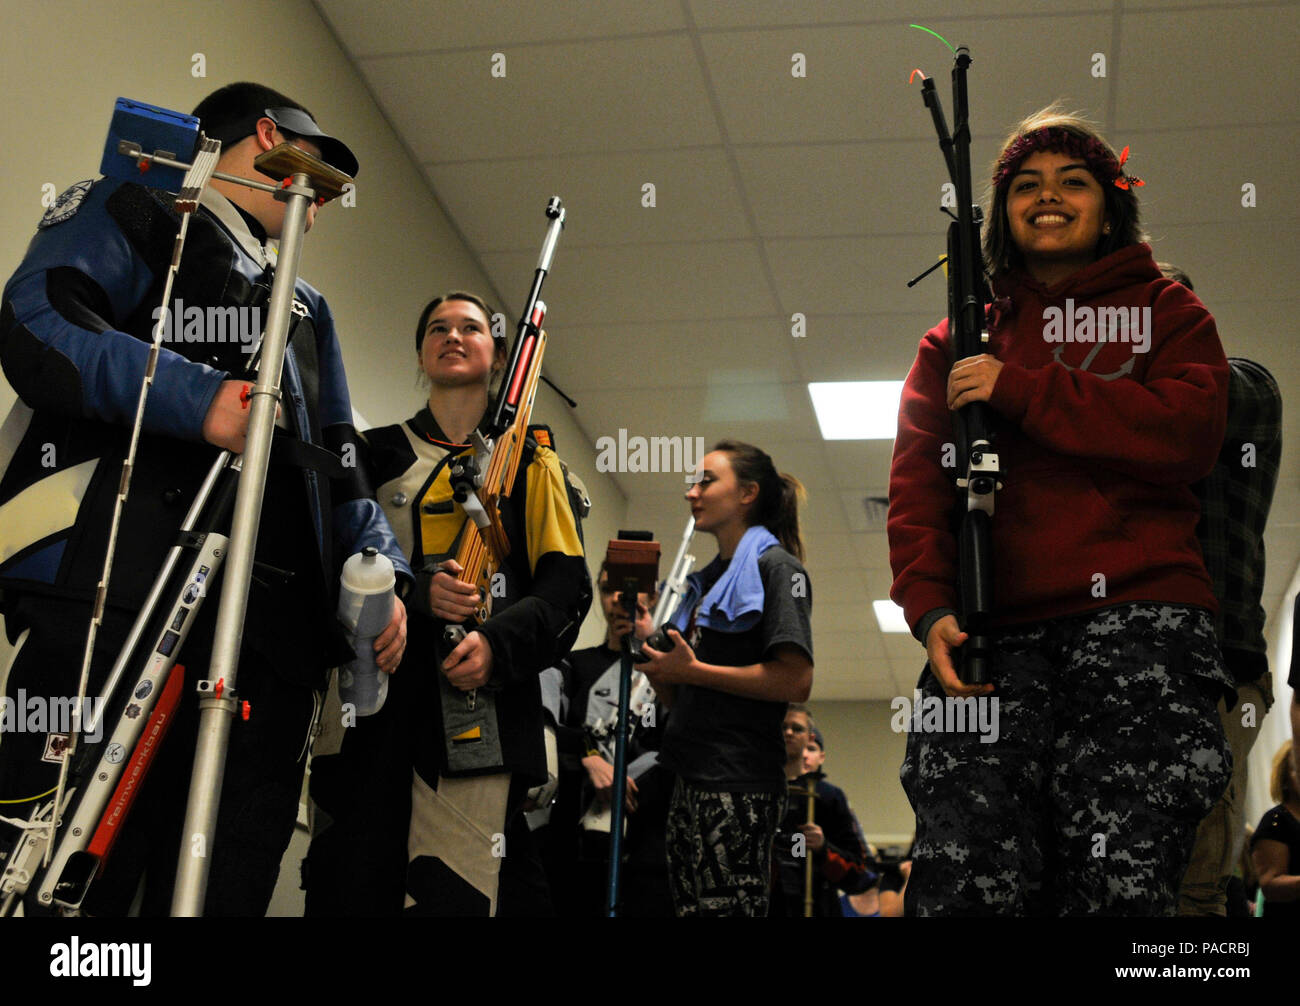 Competitors at the 2016 JROTC National Air Rifle Champions wait to enter the final match in the Sporter class on March 19 in Anniston, Ala. 56 Teams from 73 schools as well as numerous individual shooters representing all four U.S. Armed Forces shot their way through various local and regional competitions in order to qualify for this culminating event. On the right, is Cadet (Navy) Cassandra Rodriguez of Parlier High School in California who would go on to win 1st Place in the Sporter class. Stock Photo